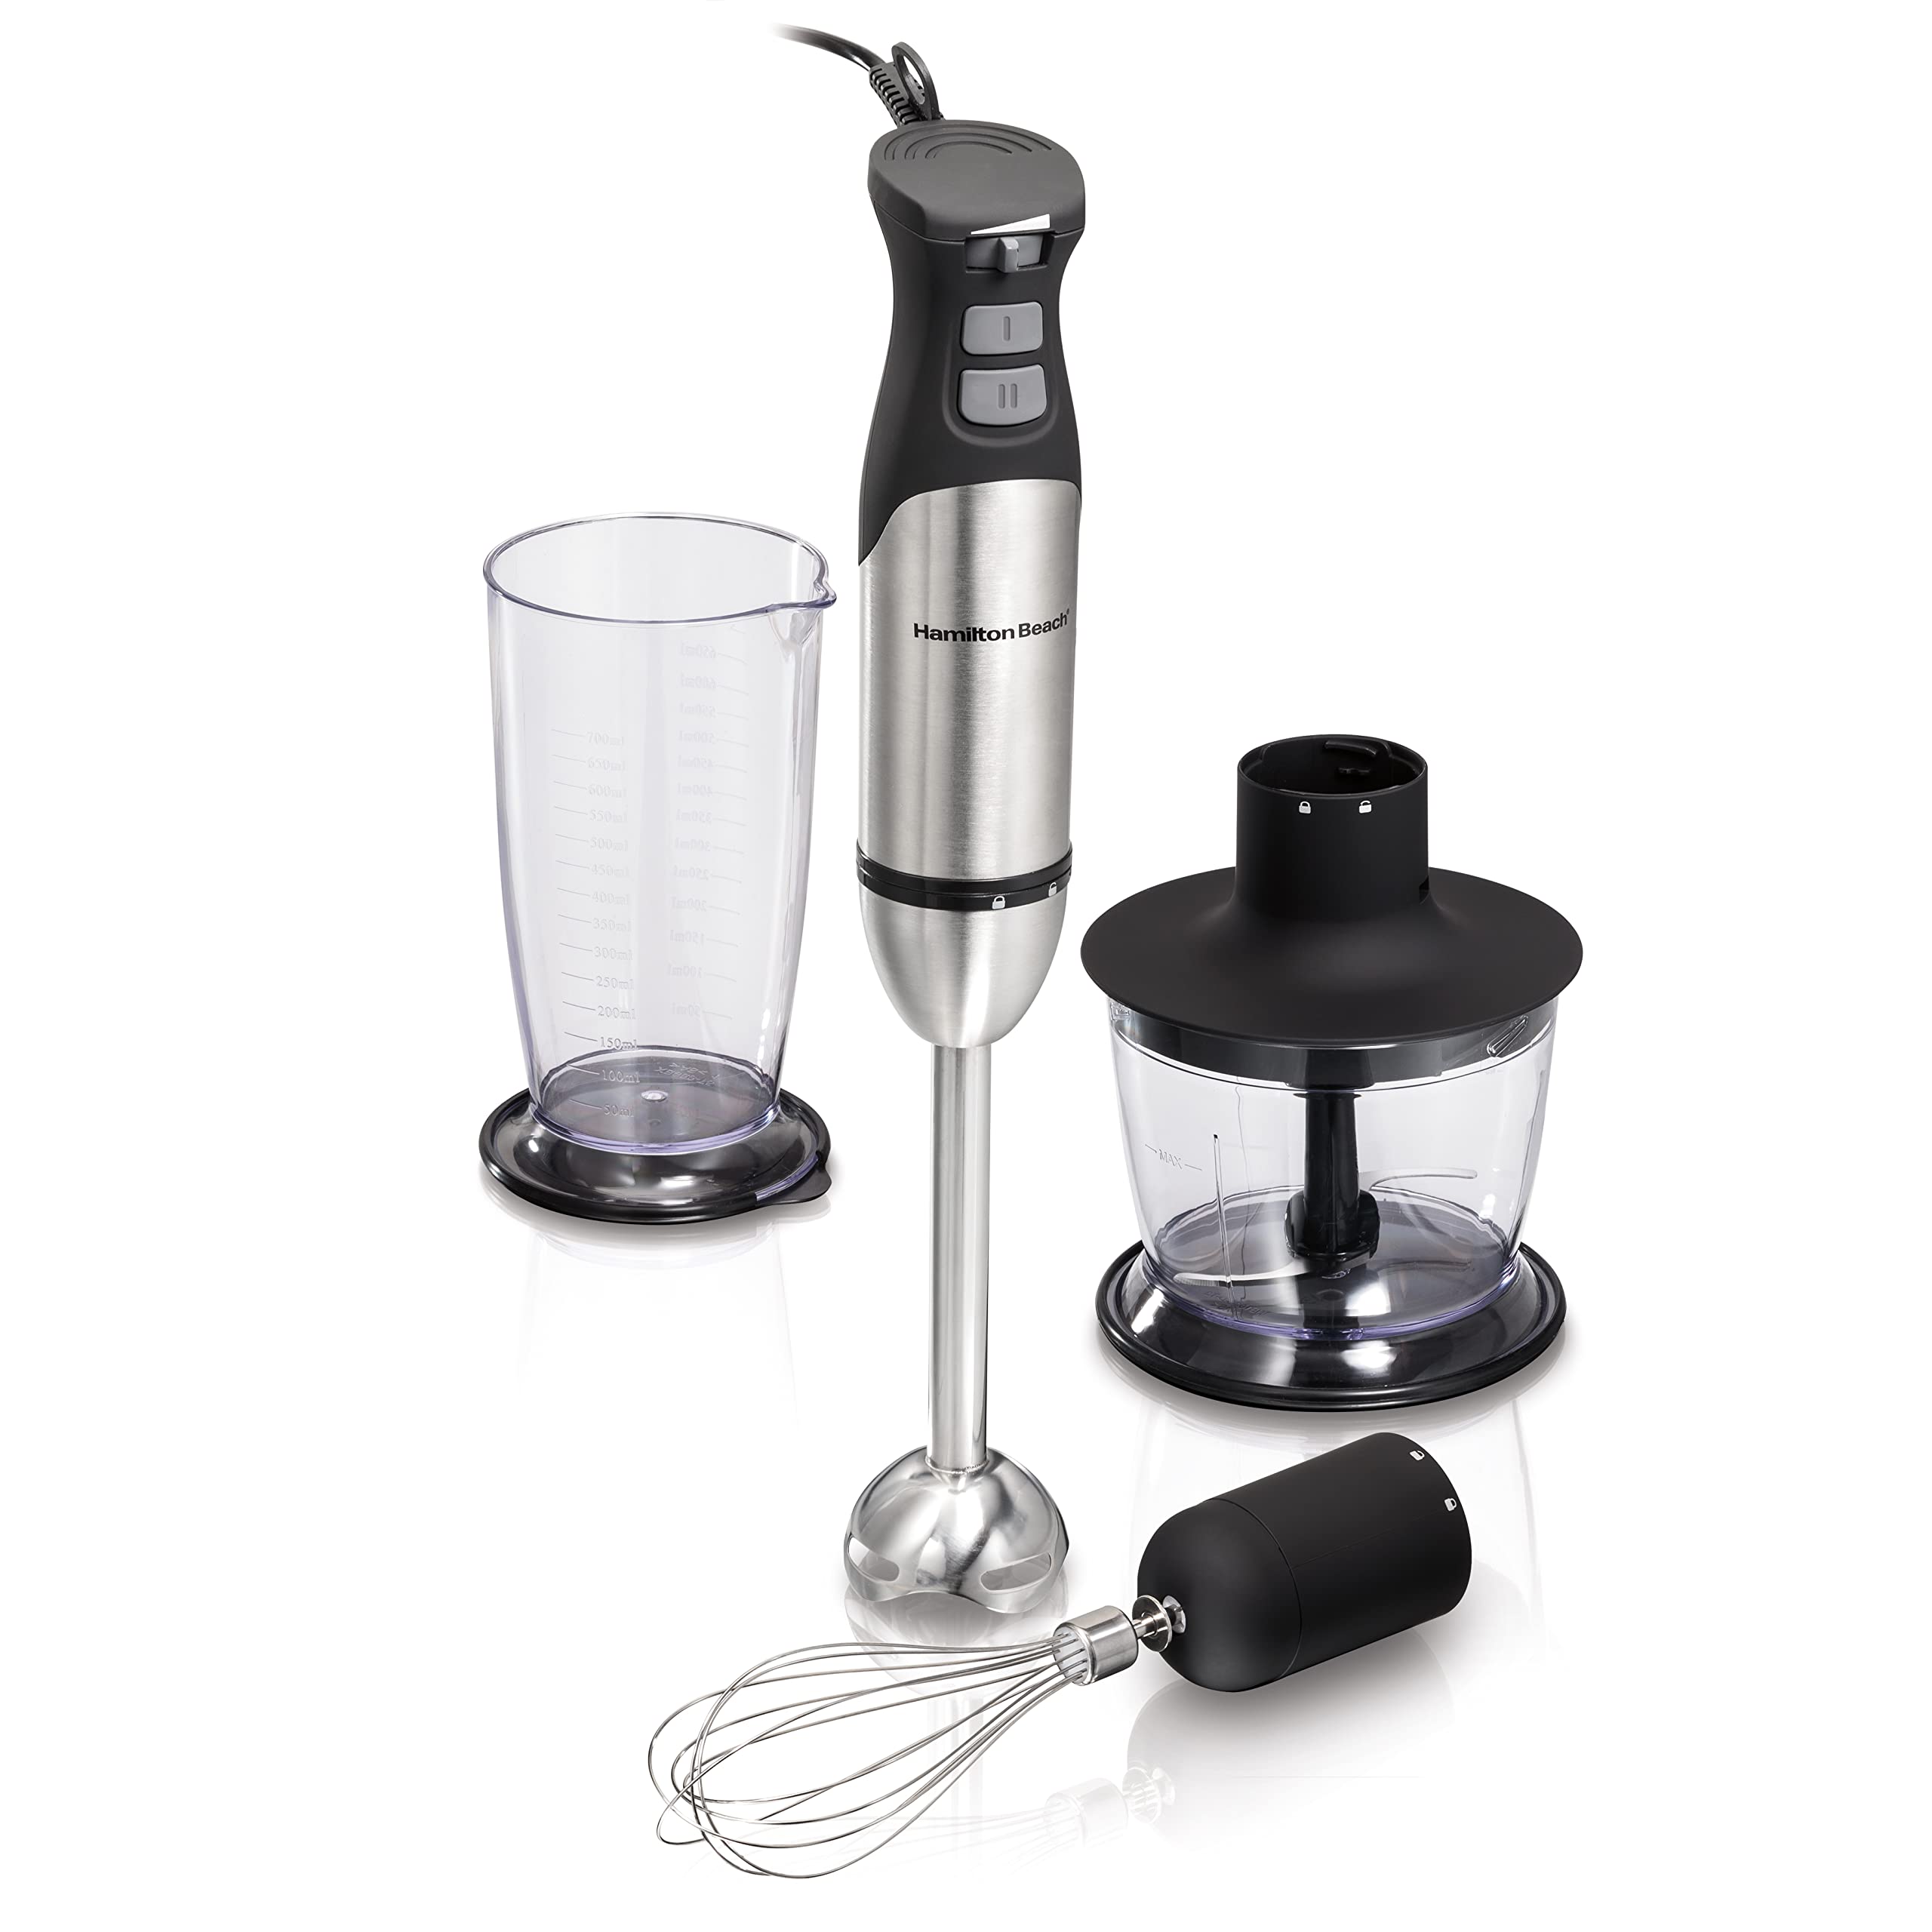 Hamilton Beach 5 In 1 Stainless Steel Hand Blender, Powerful Turbo Boost With Variable Speeds, Chopper, Mixer, Food Processor